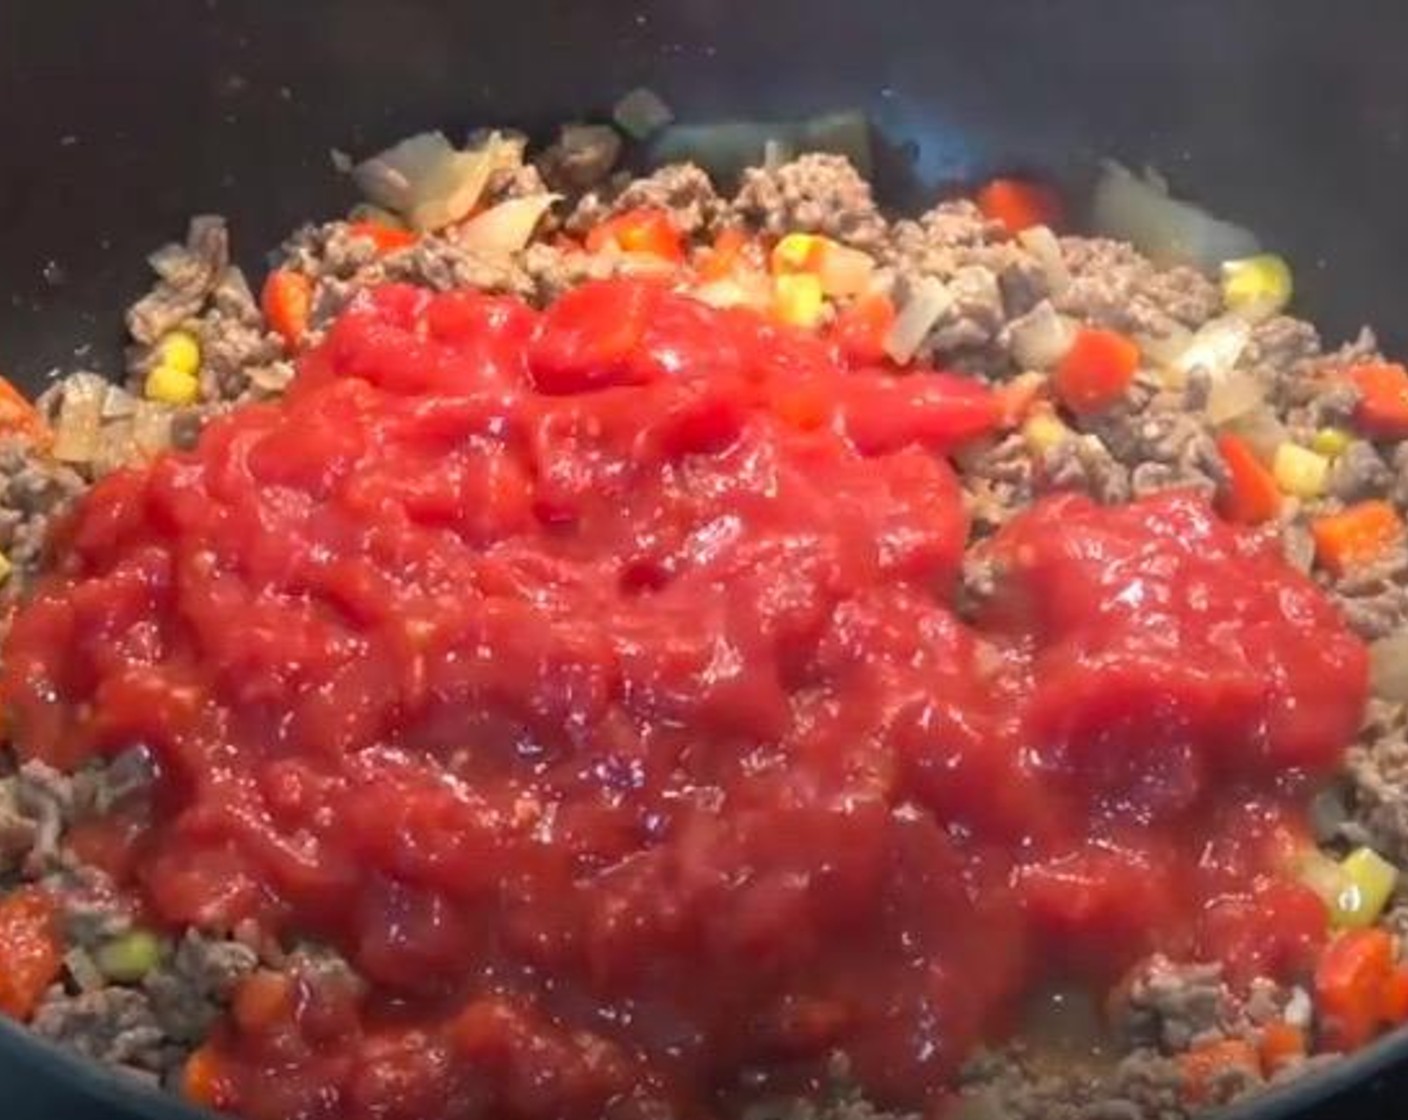 step 4 Add Canned Diced Tomatoes (1 3/4 cups). Reduce the temperature to low and allow to simmer for 5 minutes, or until the mixture thickens slightly. Season with Salt (to taste).